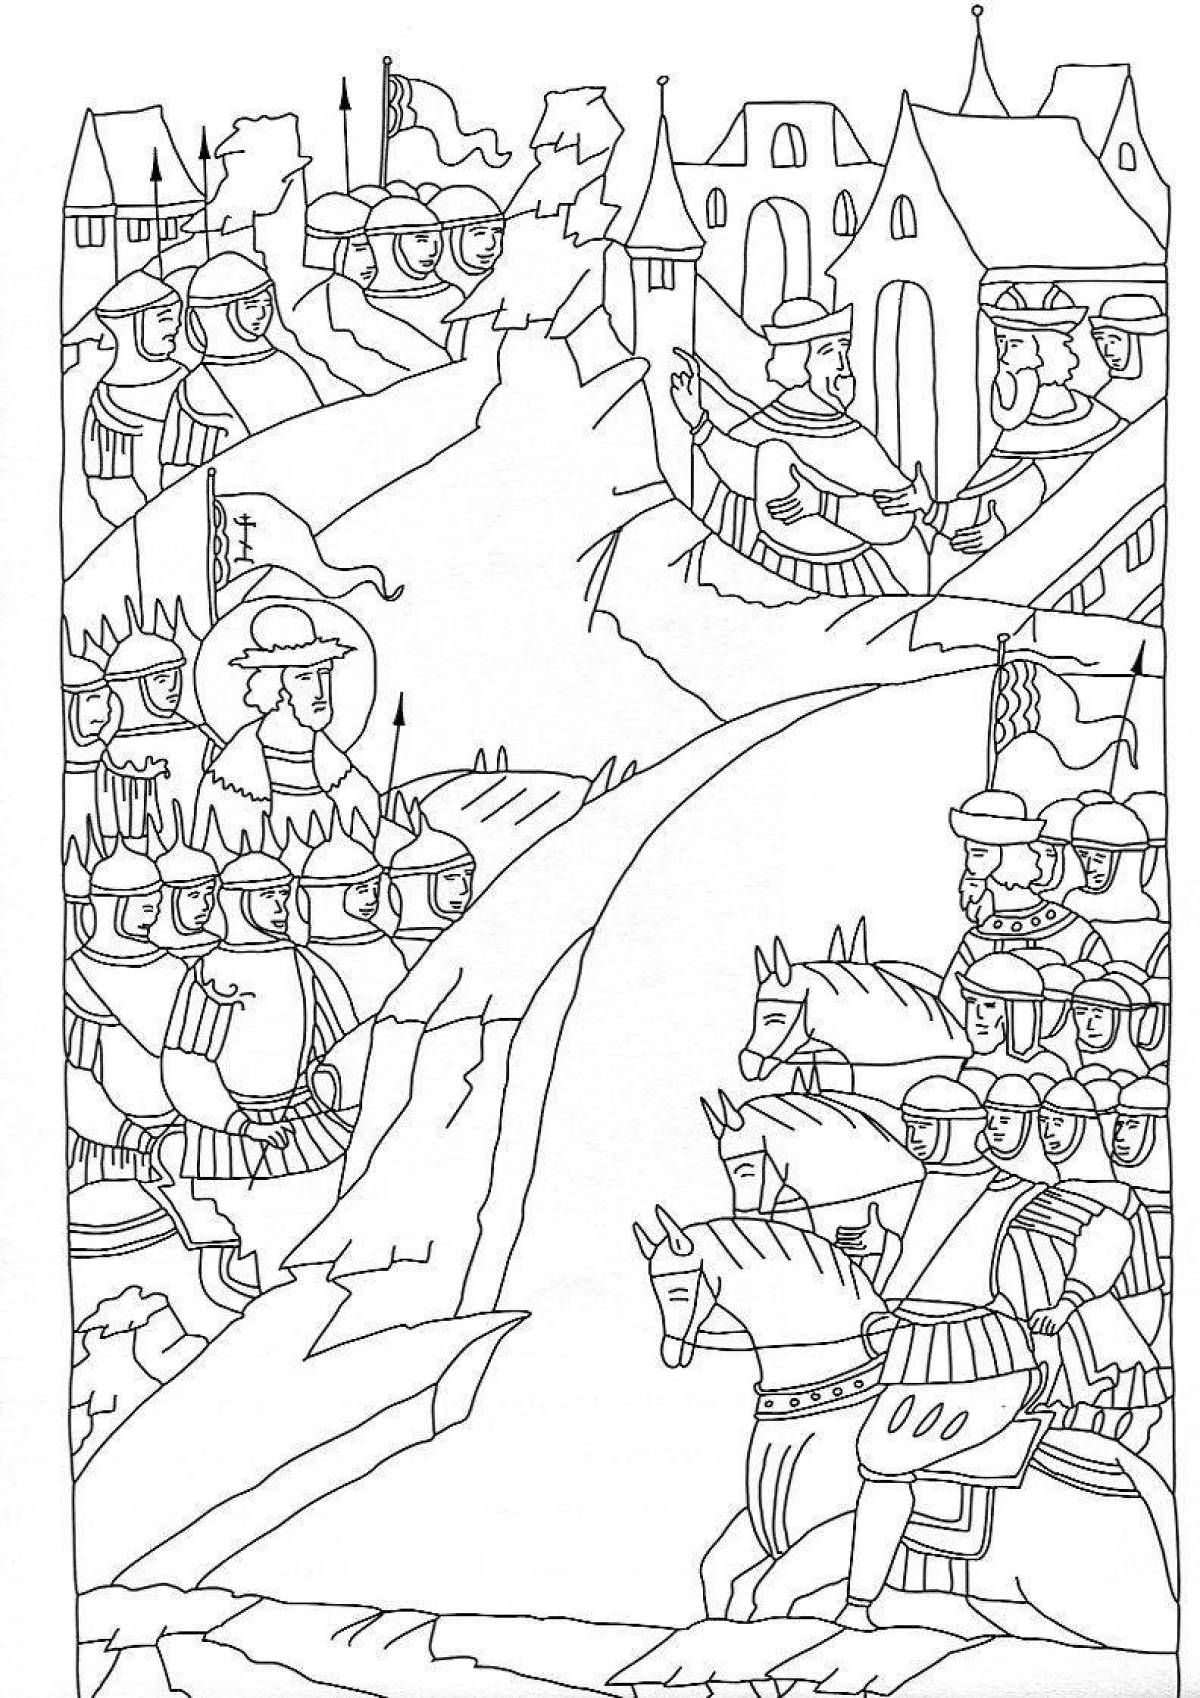 Exciting battle on ice coloring book